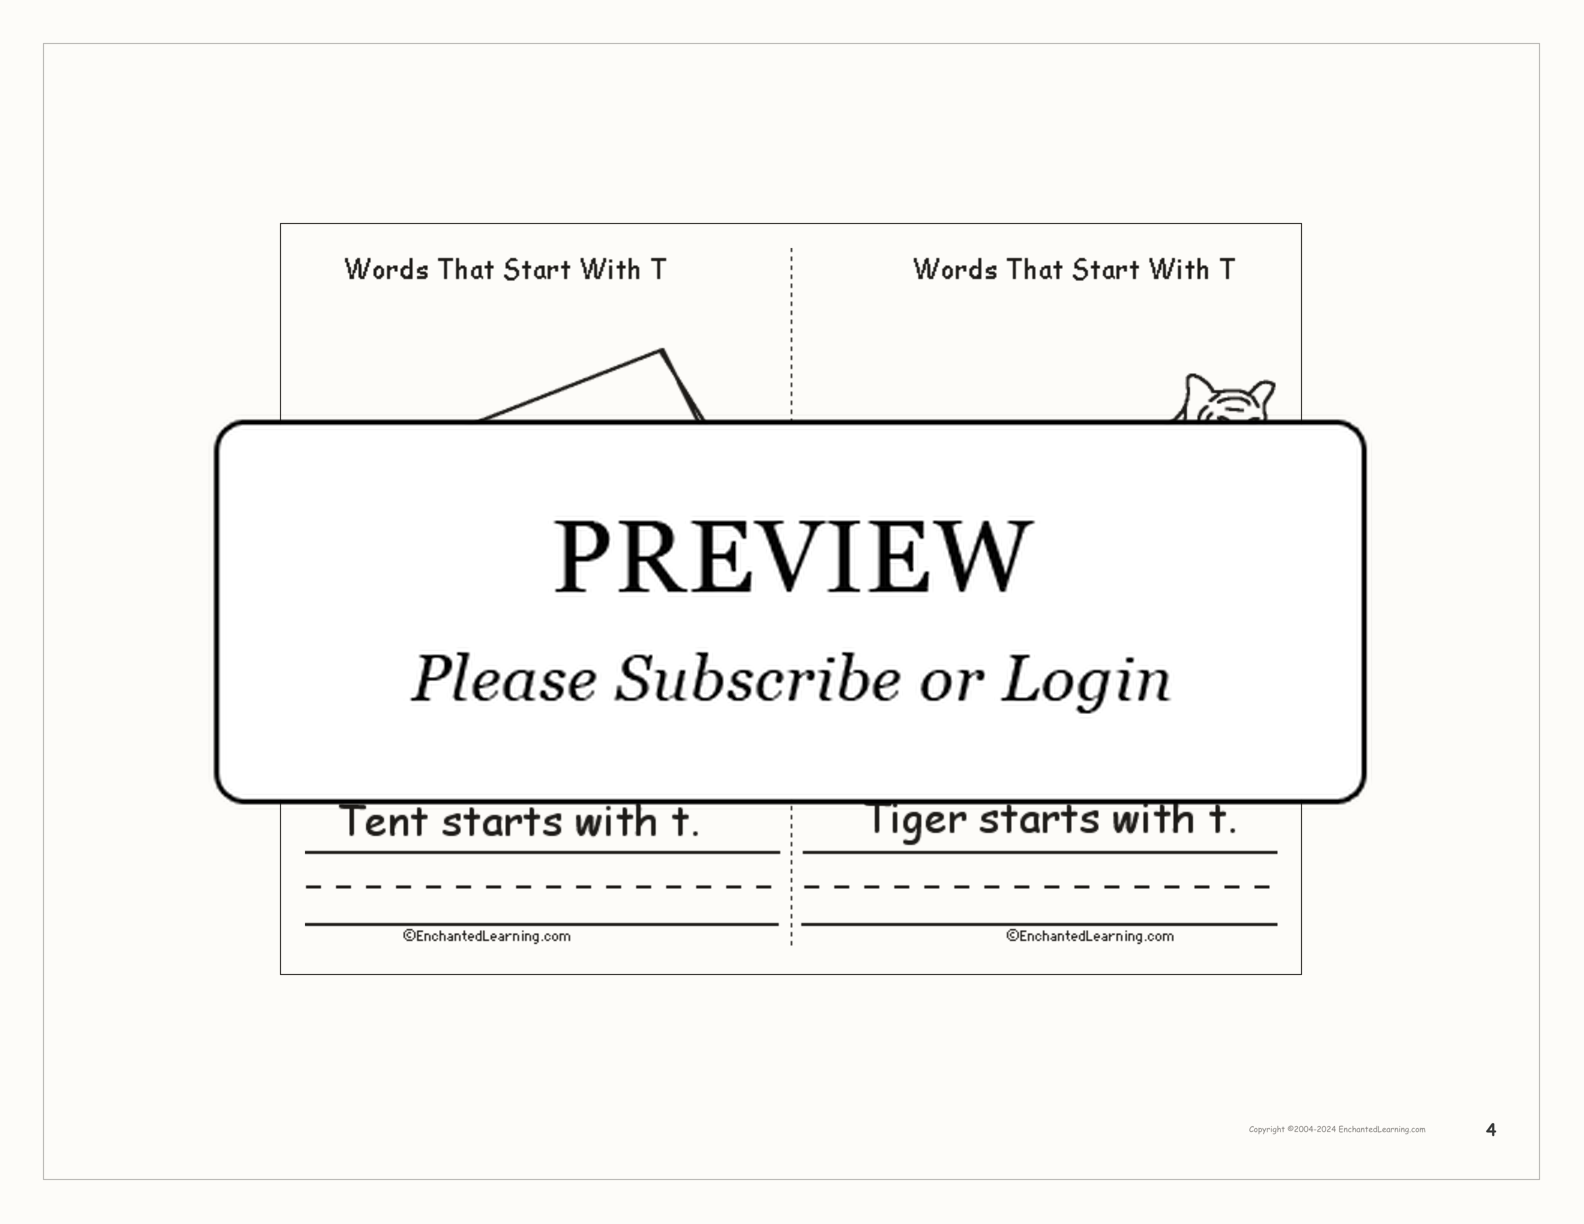 Words That Start With T interactive printout page 4